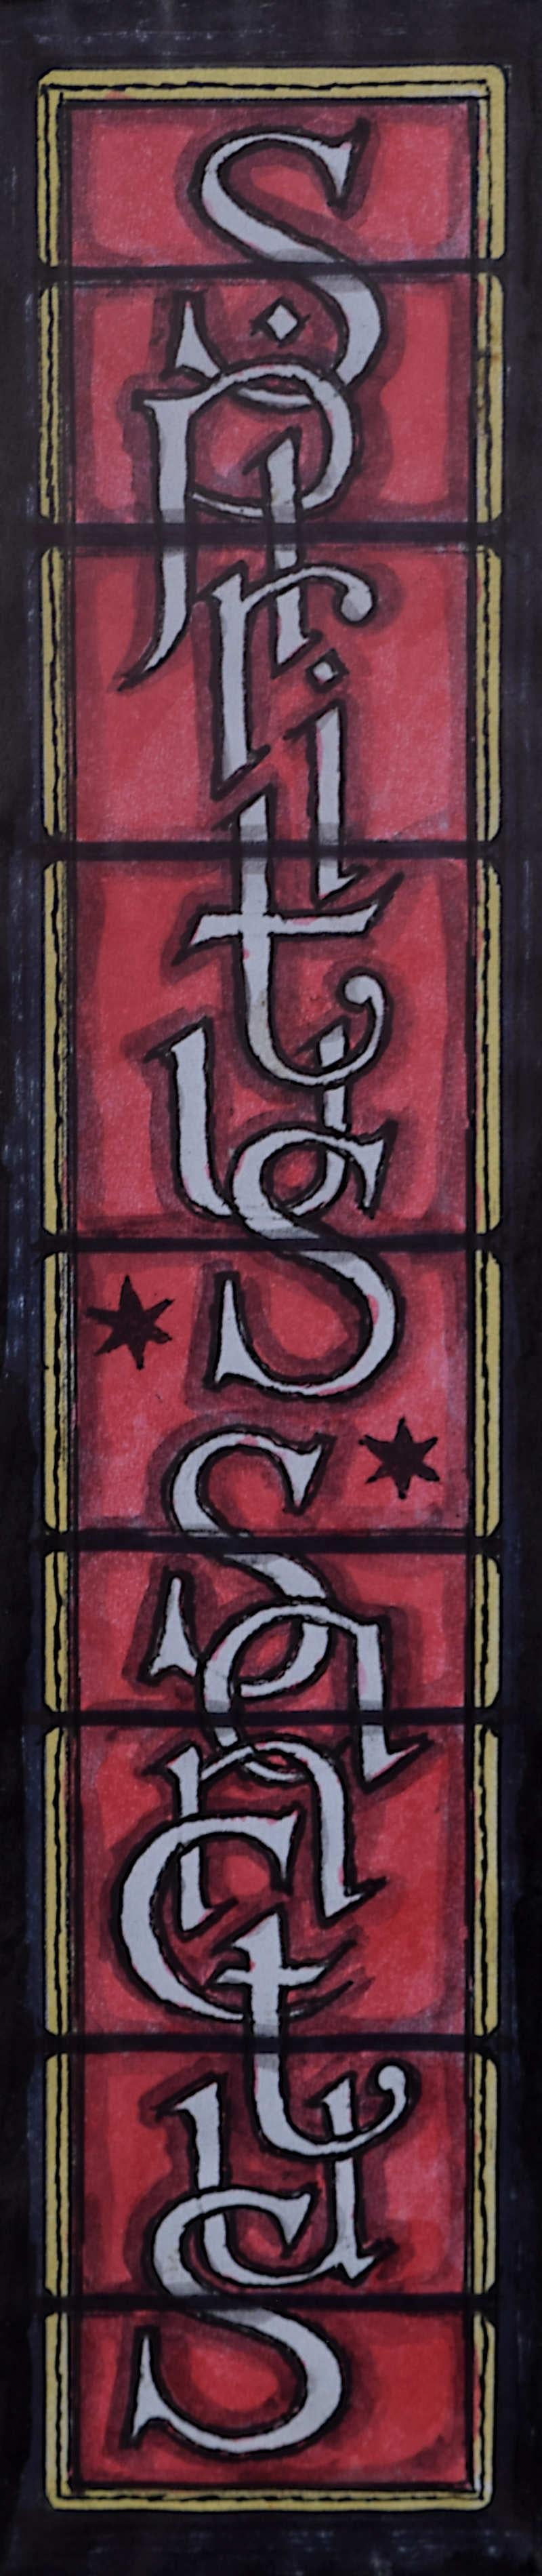 We acquired a series of watercolour stained glass designs from Jane Gray's studio. To find more scroll down to "More from this Seller" and below it click on "See all from this seller." 

Jane Gray (b.1931)
Stained Glass Design
Watercolour
24.5 x 5